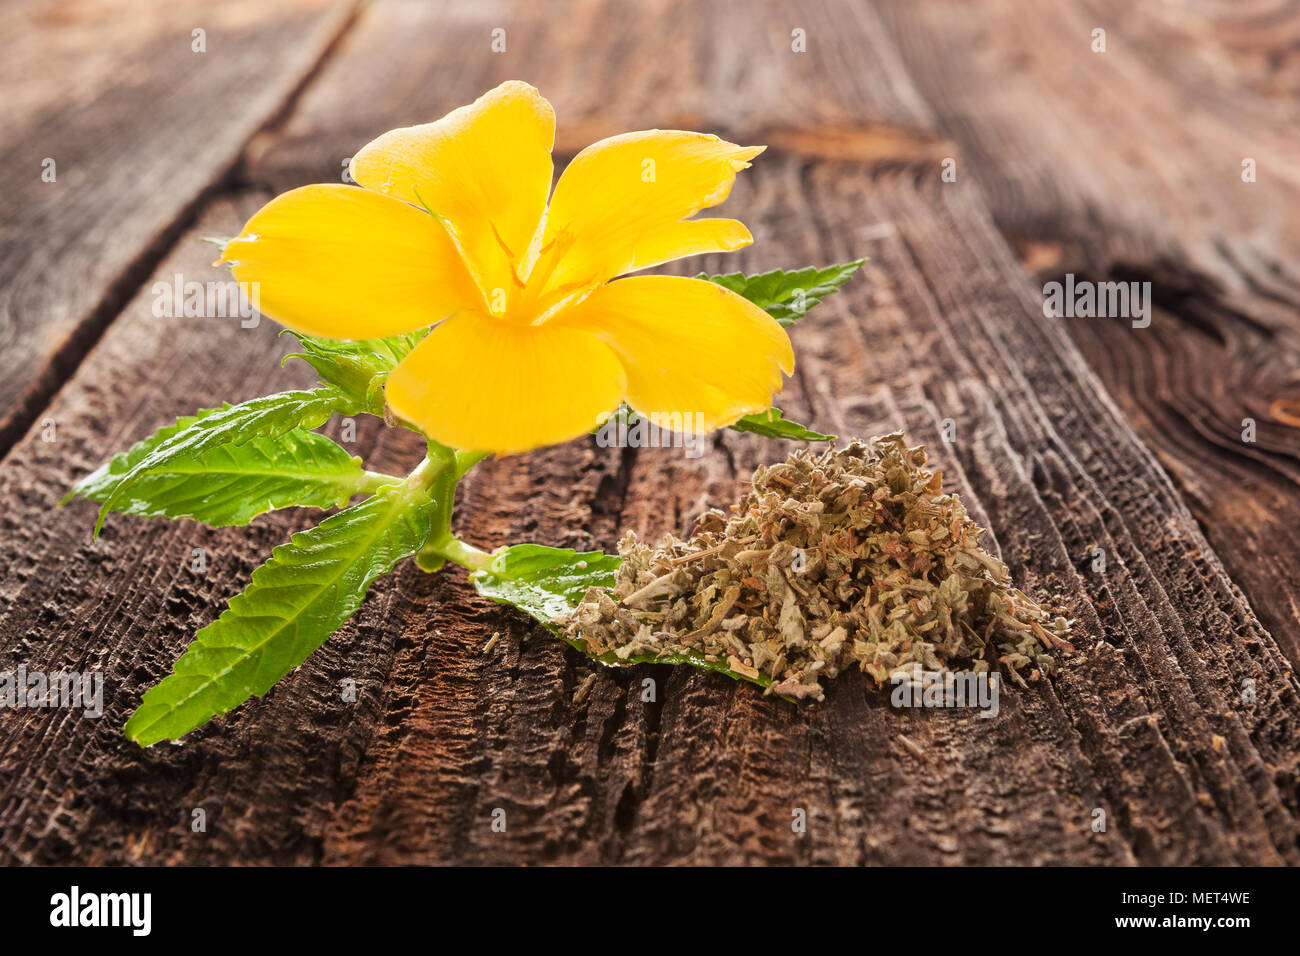 Damiana, turnera diffusa flower on brown wooden table. Medicinical herbs. Stock Photo